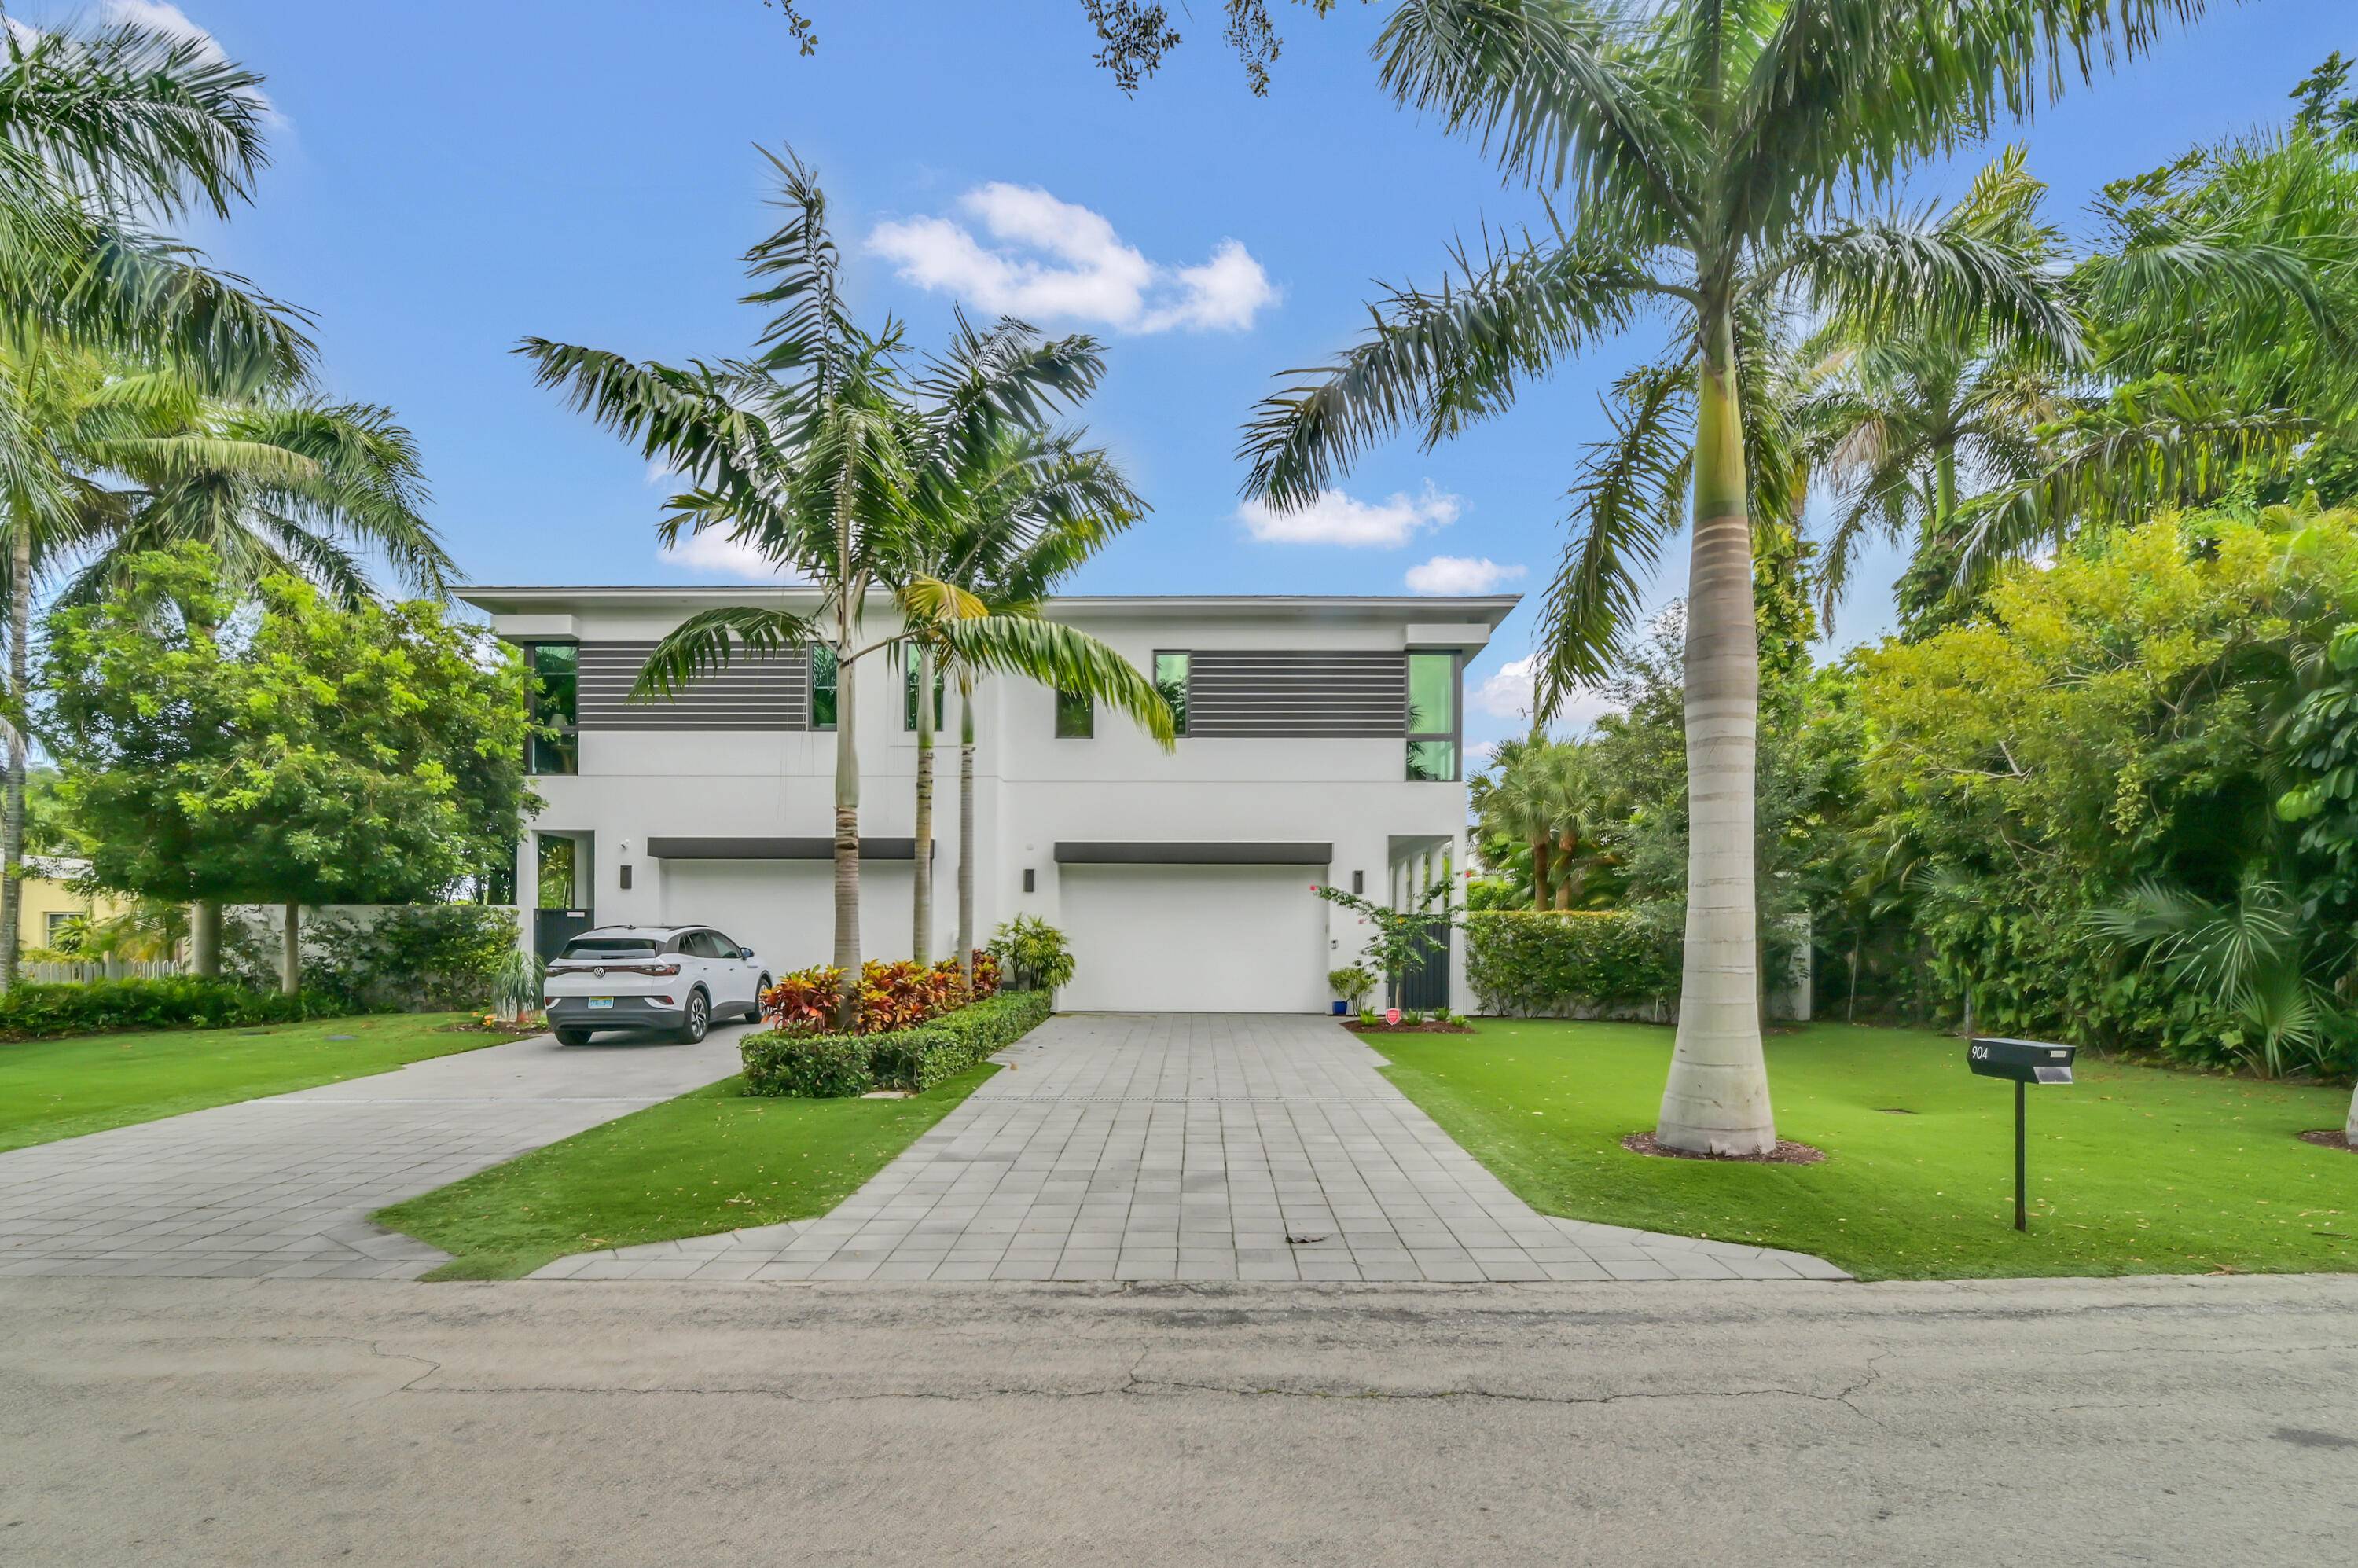 This East Delray Beach home is situated less than a mile from the closest beach access point and approximately 1.